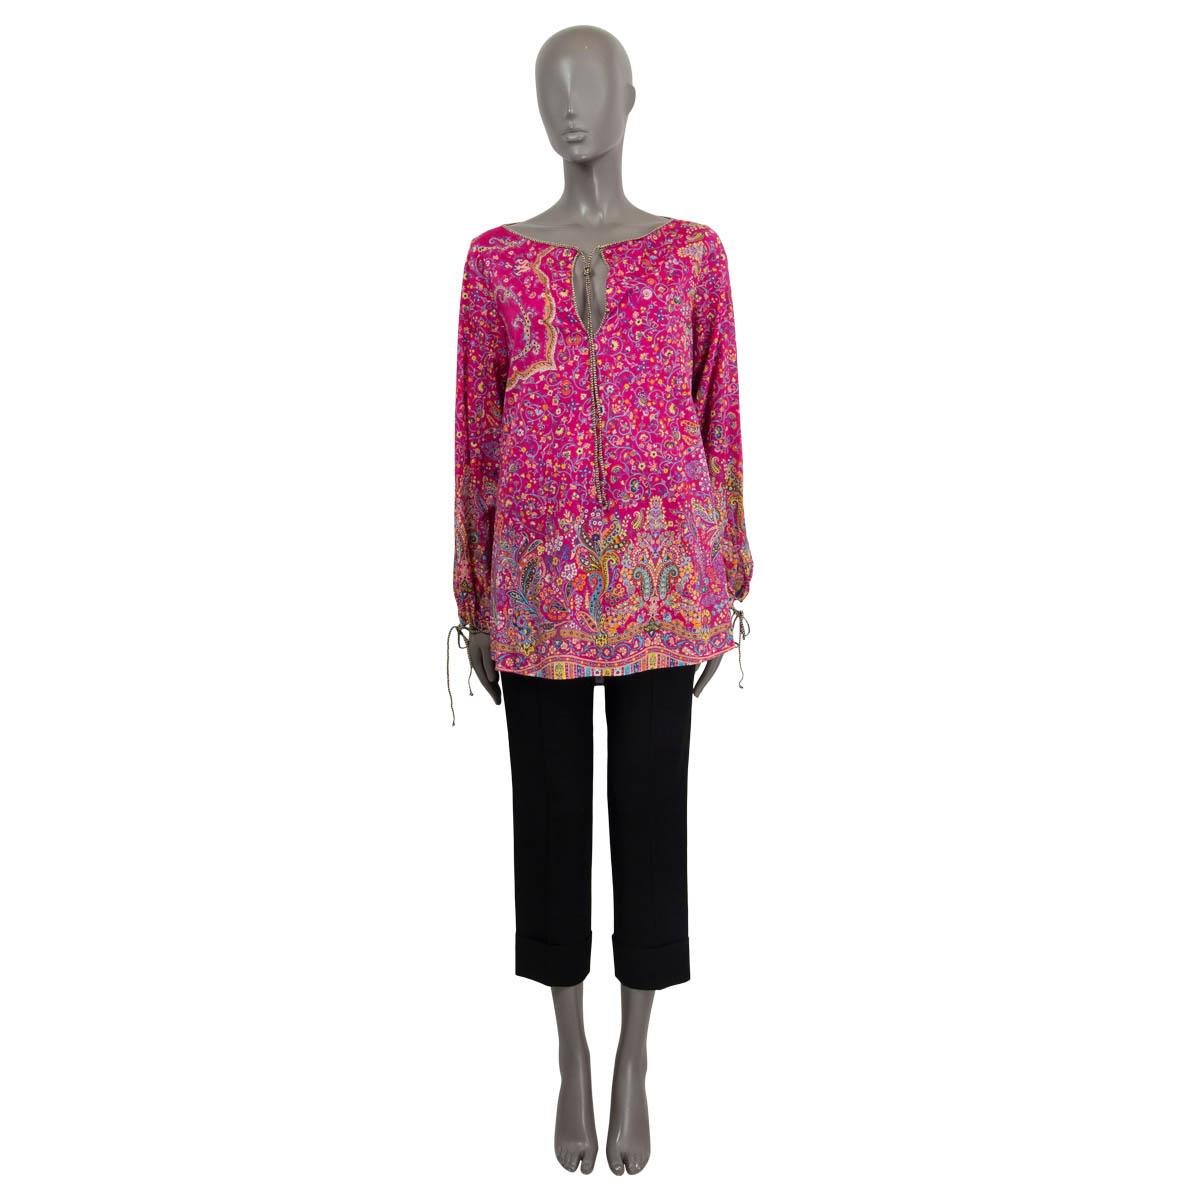 100% authentic Etro paisley print tunic blouse in pink, yellow, blue and orange cotton (100%) featuring cord trim keyhole around the neck and around wrists. Has been worn and is in excellent condition. 

Measurements
Tag Size	44
Size	L
Shoulder